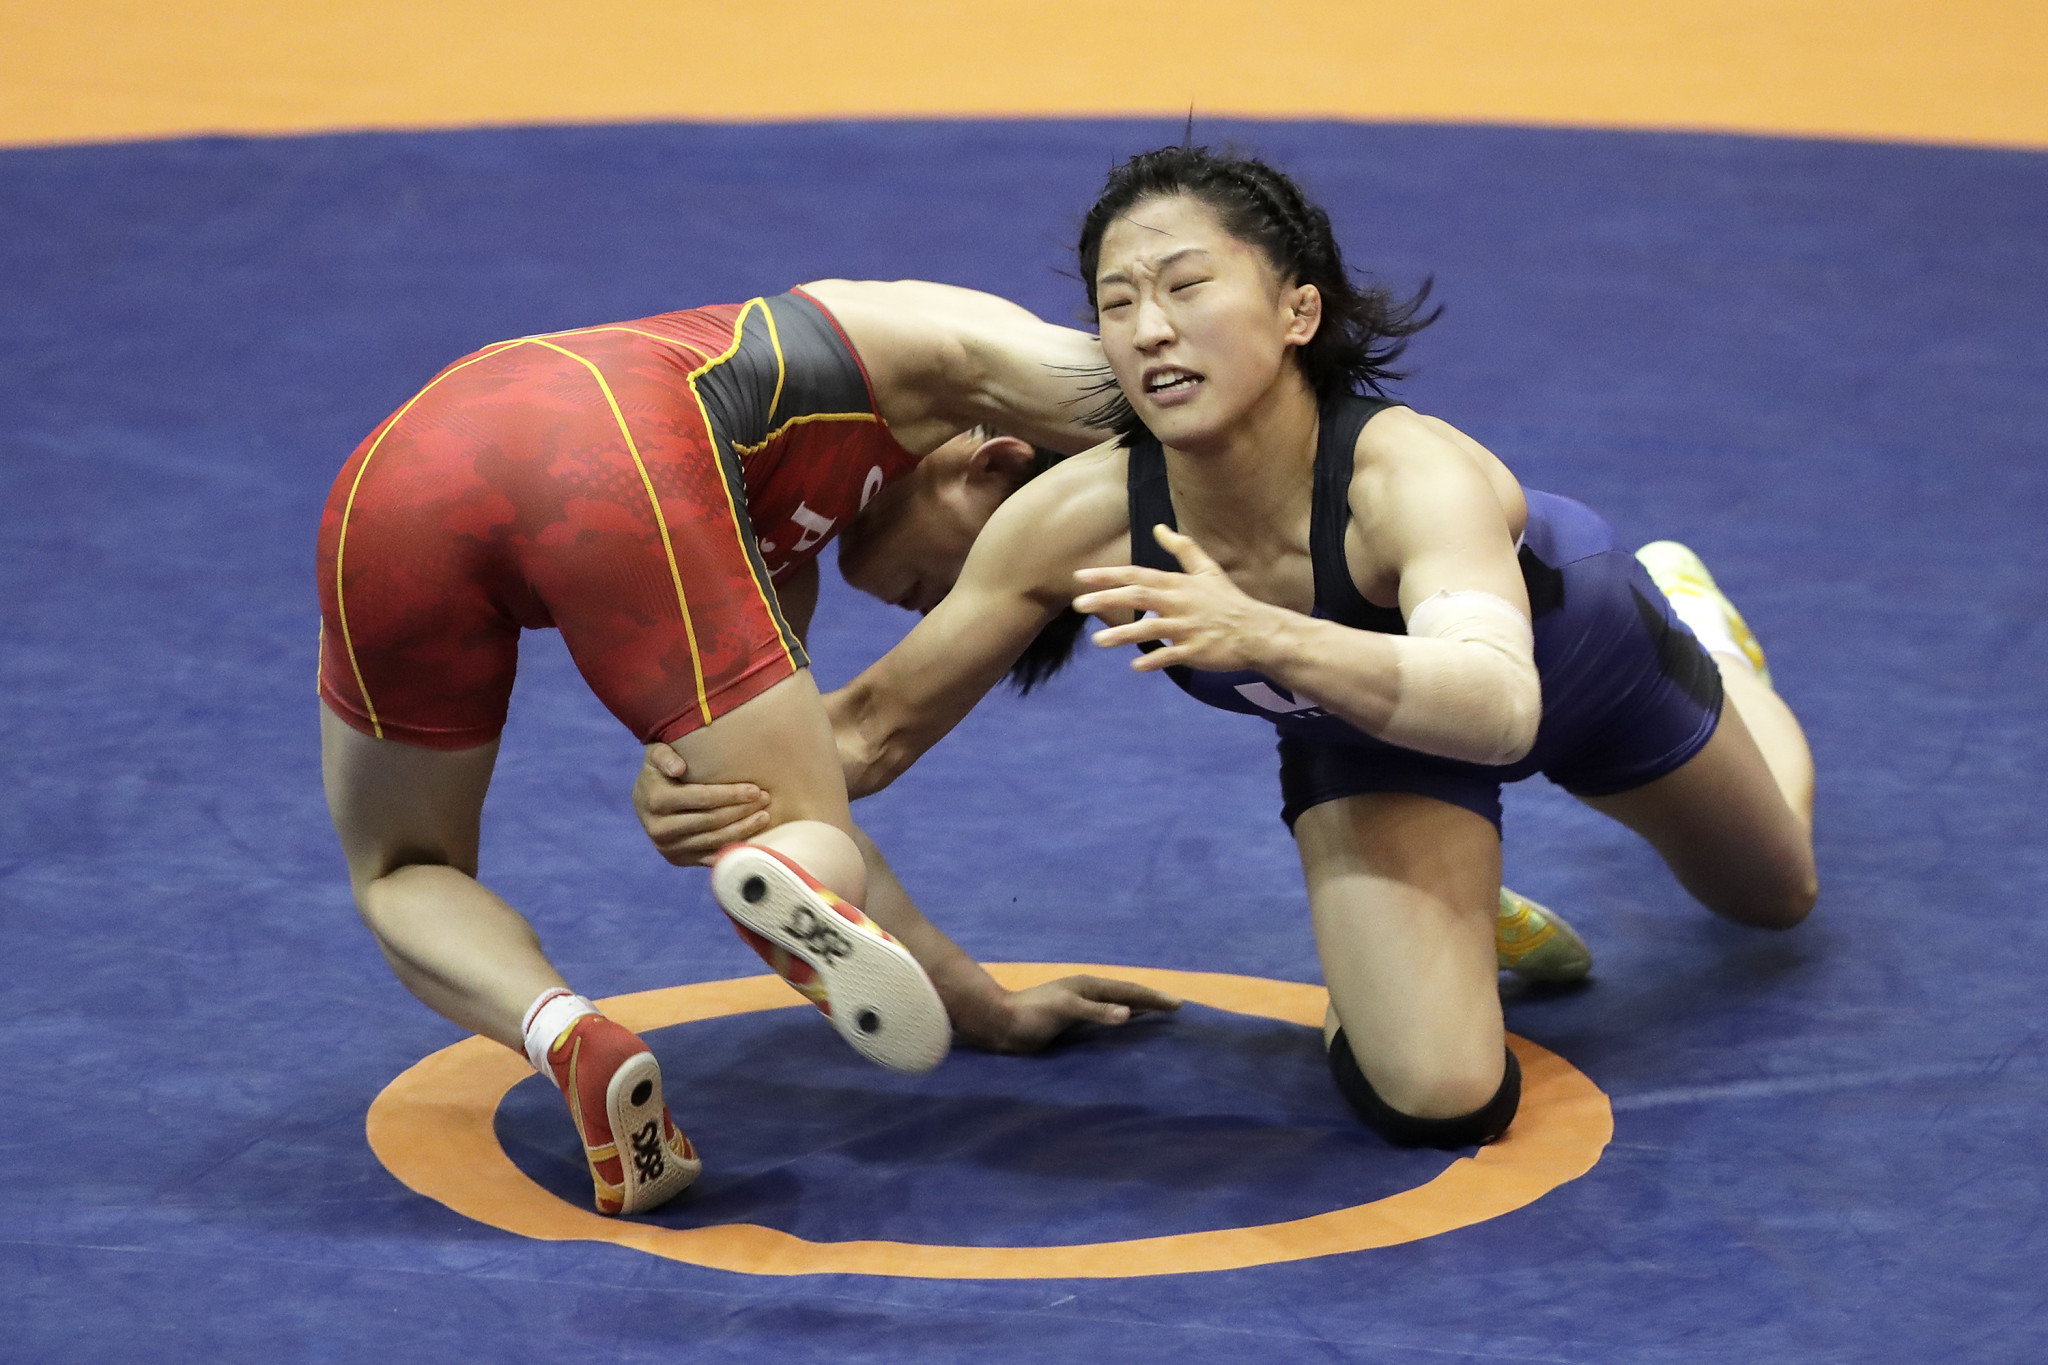 Yui Susaki of Japan sealed a seventh title at the UWW UWW World Junior Championships in Tallinn ©Getty Images 